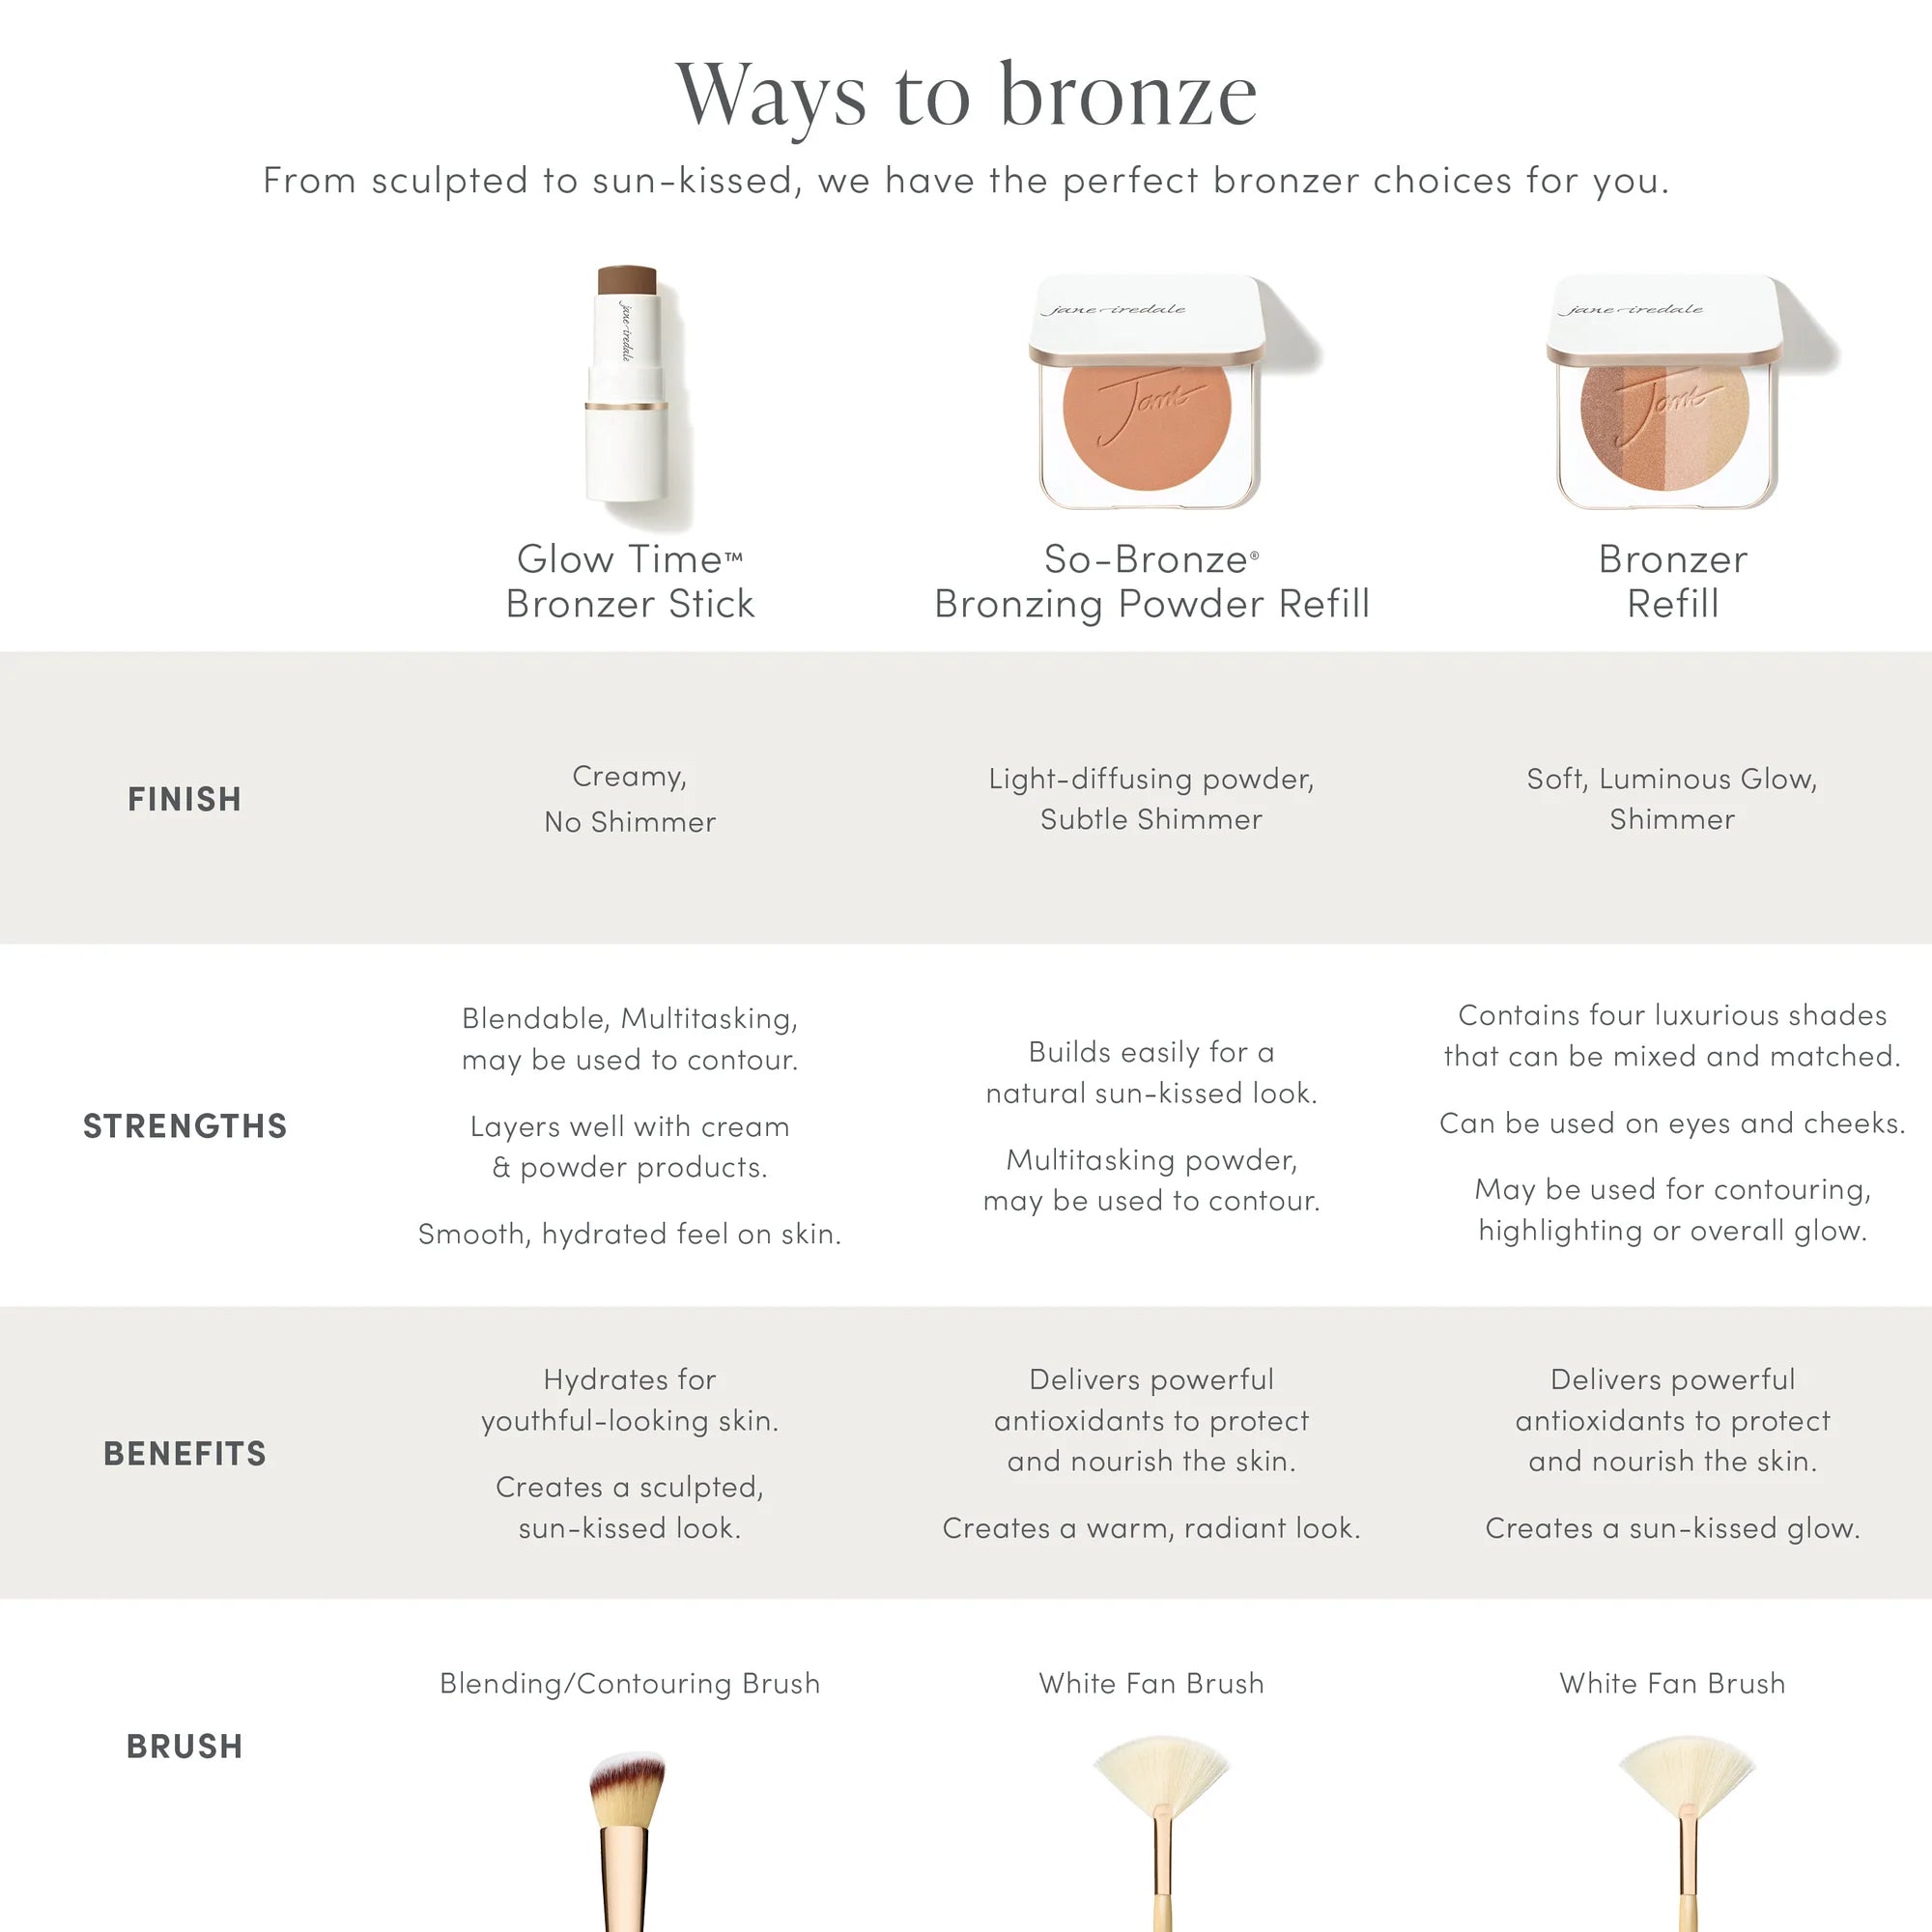 Jane Iredale's different bronzers and their descriptions